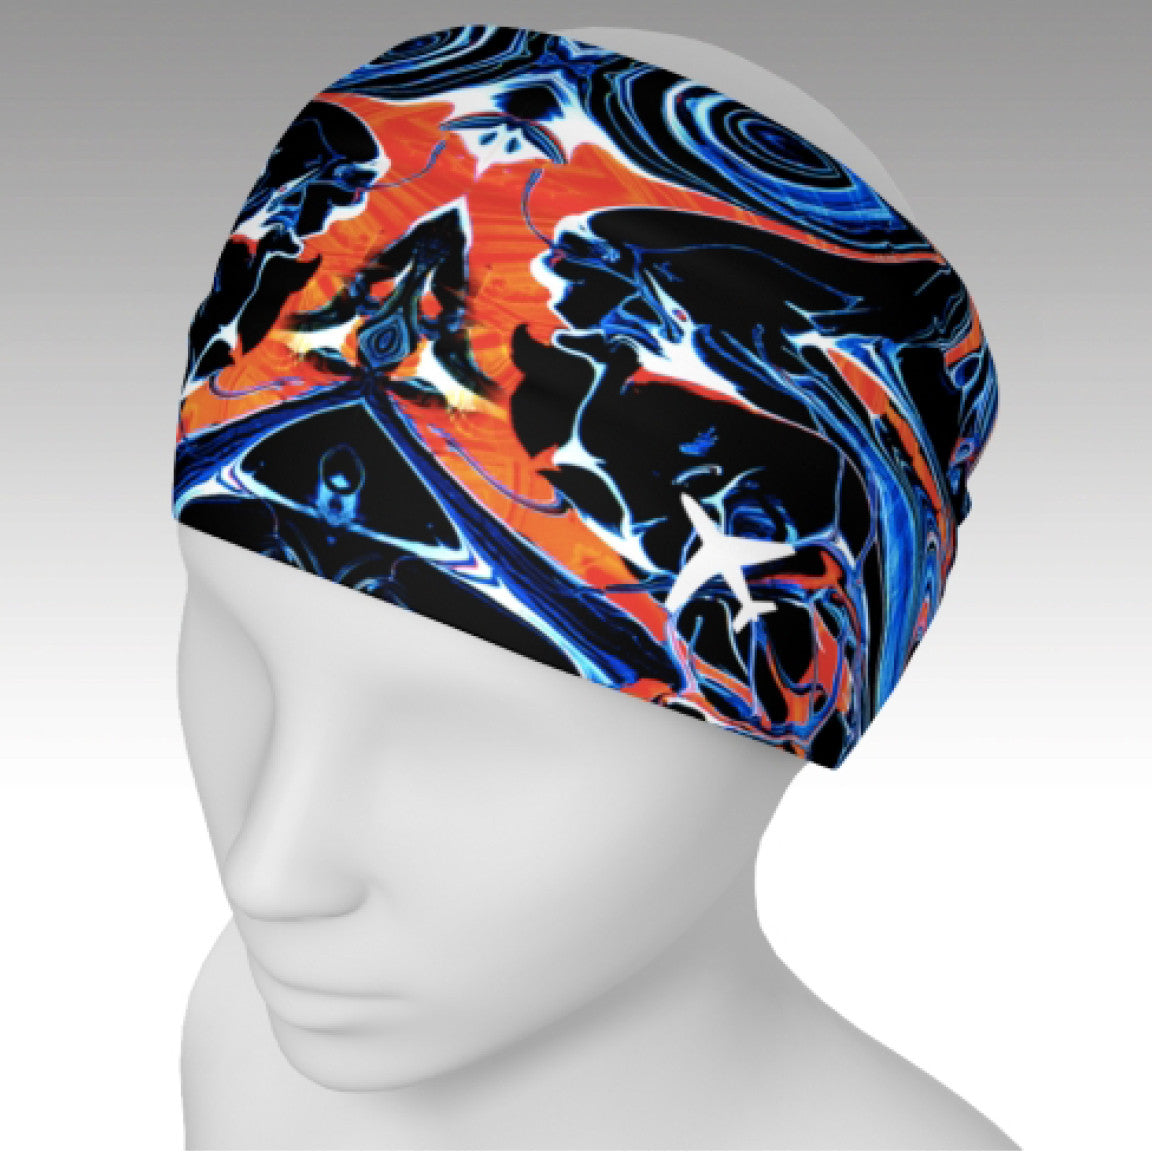 Full wrap headband with Mystic design.  A kaleidoscope of colors and airplanes. Use as a scarf to keep warm or a headband to keep your hair back